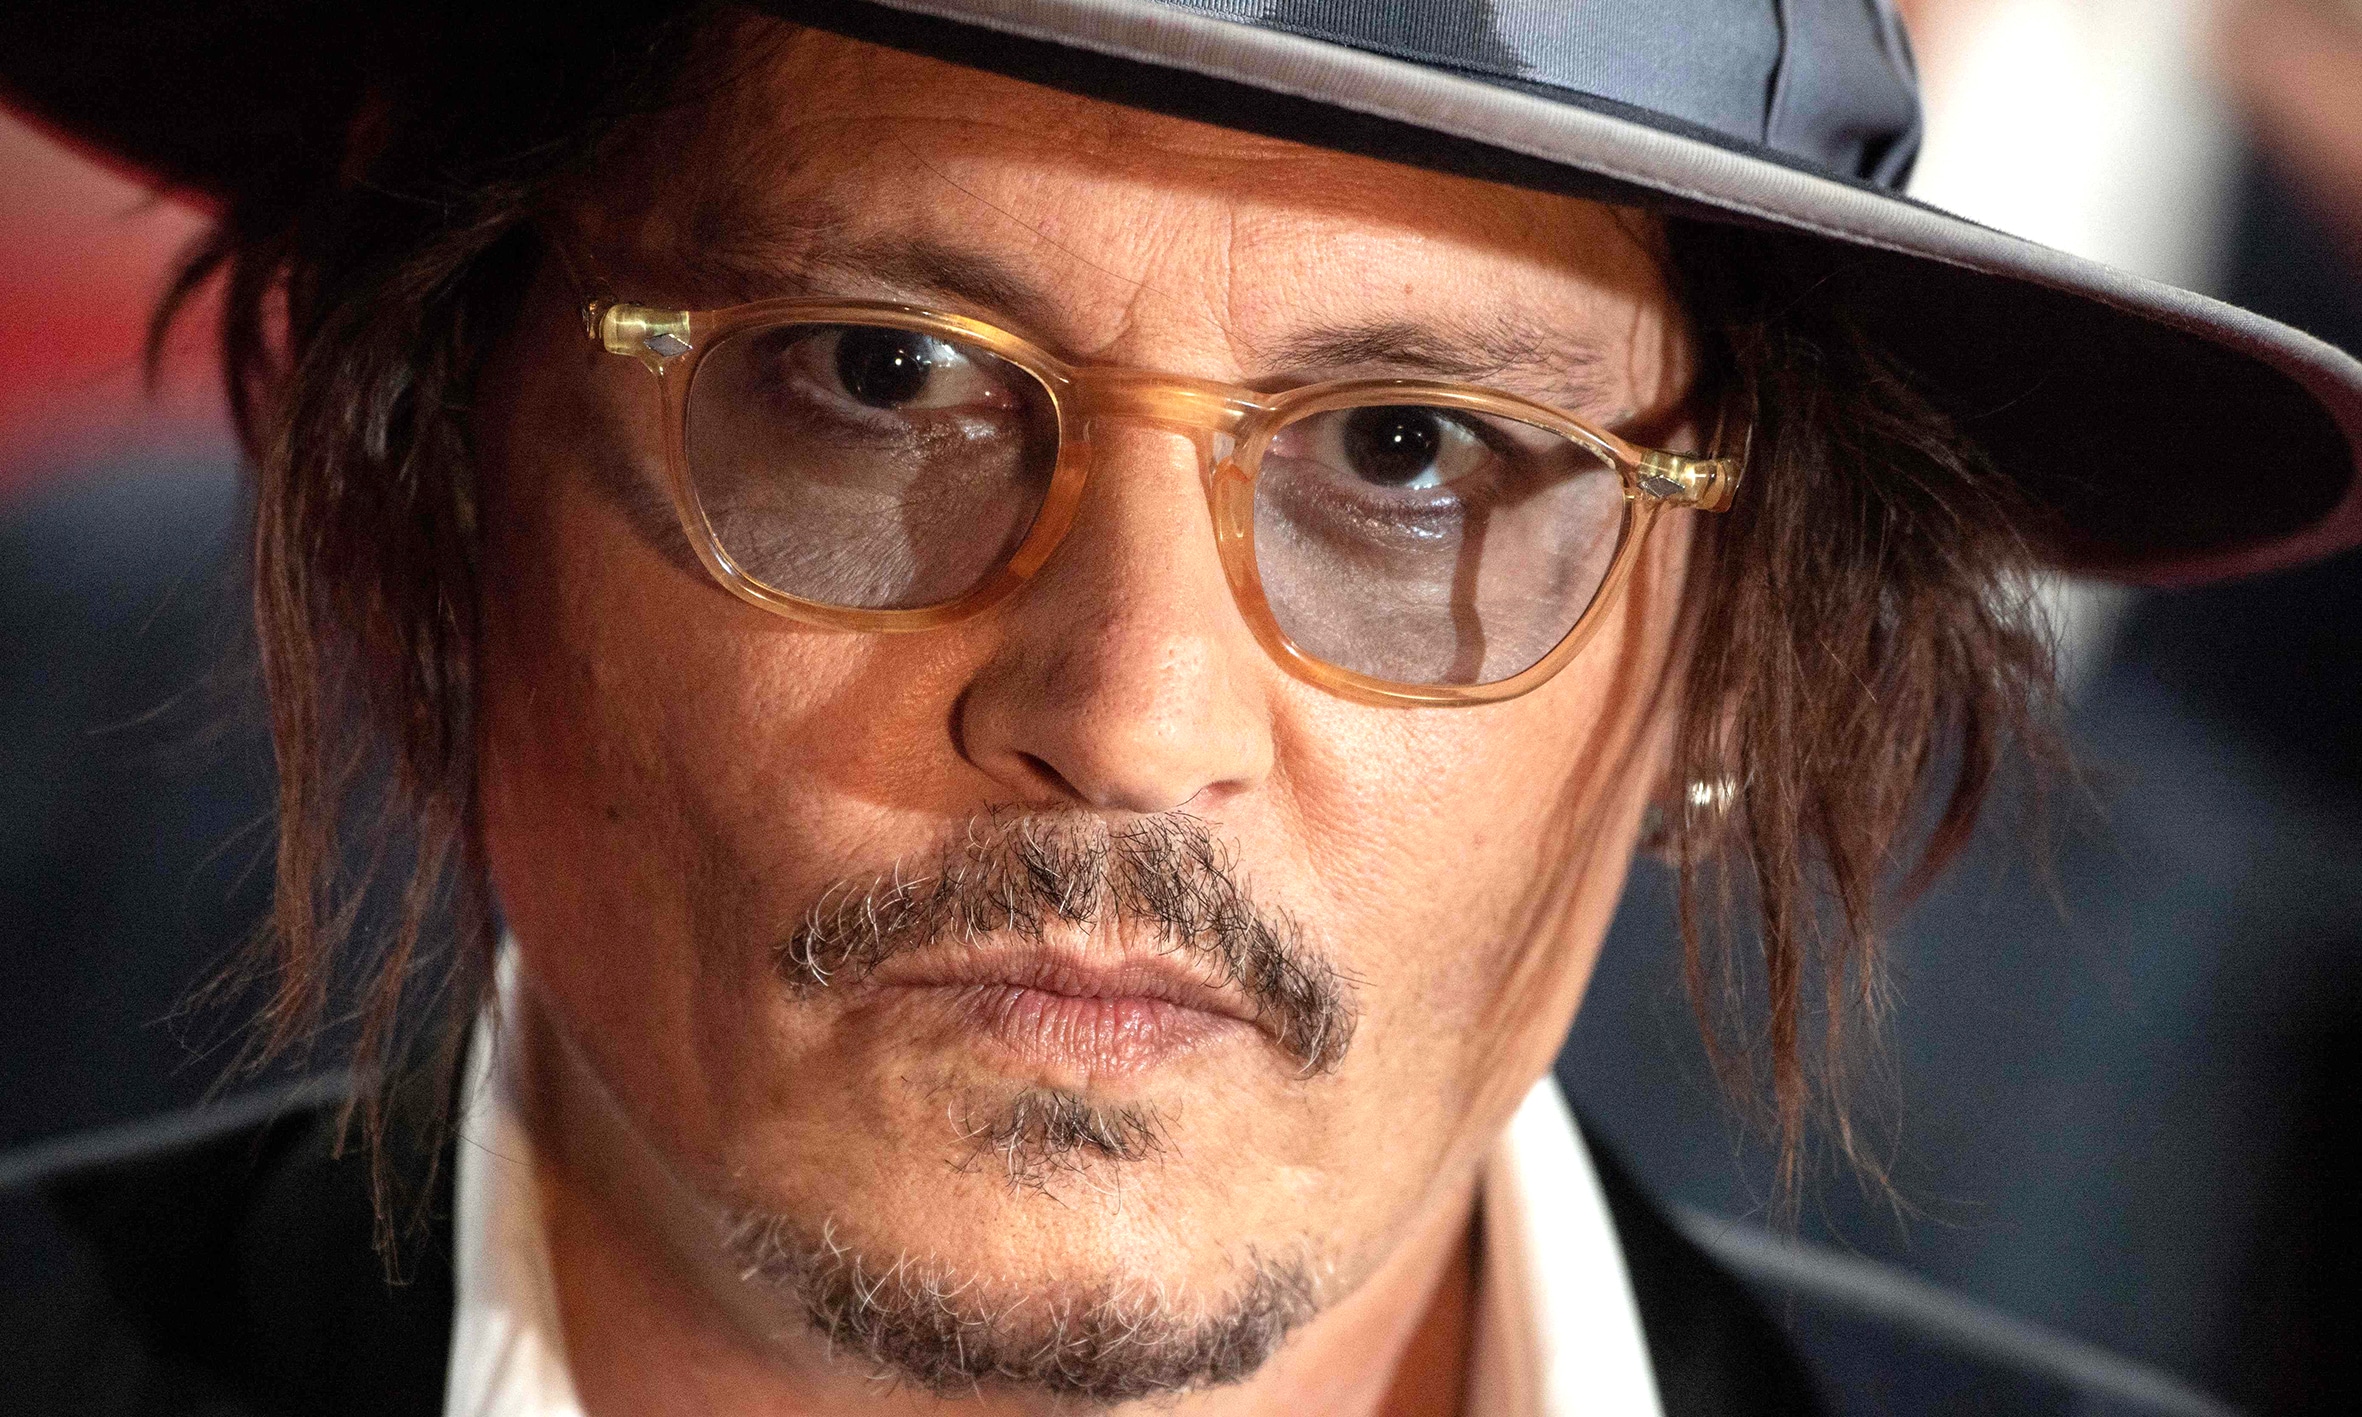 File picture shows US actor Johnny Depp arrives on the red carpet of the 47th Deauville US Film Festival in Deauville, western France.—AFP photos